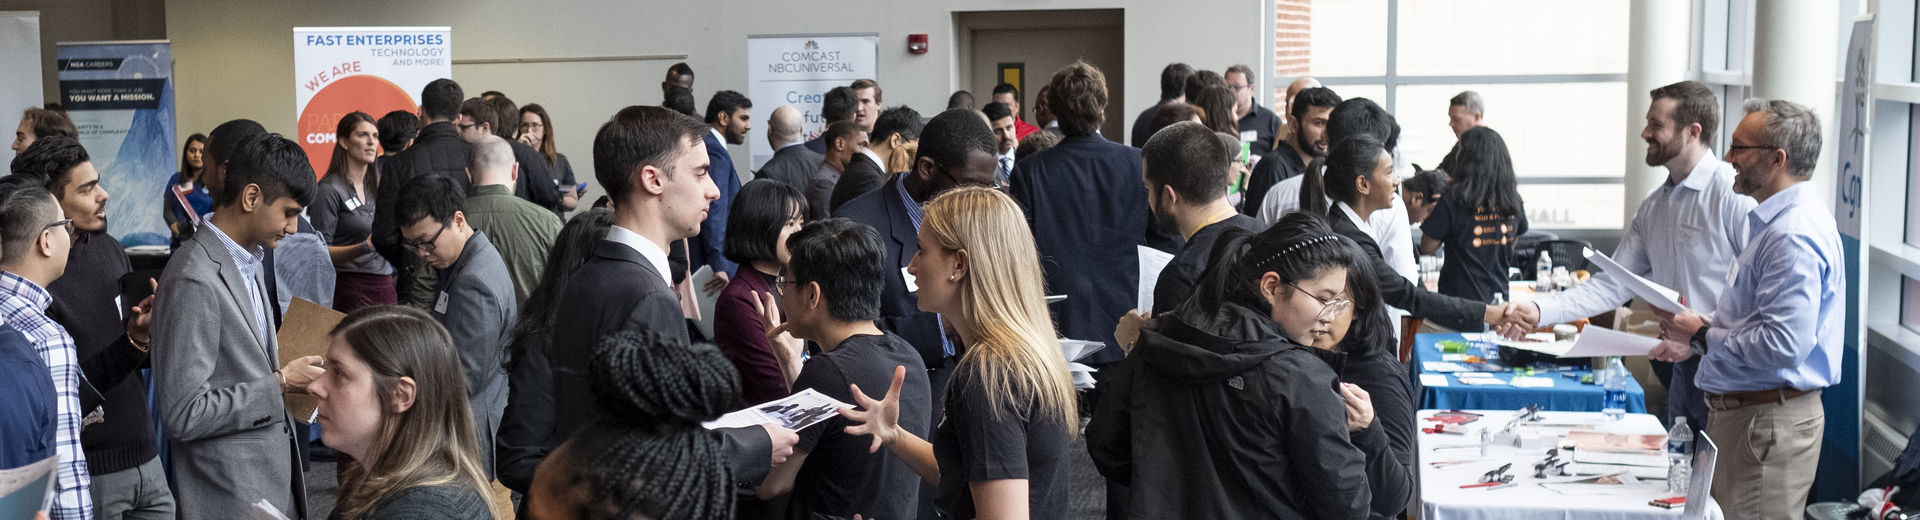 Crowd of employers and students at a career fair